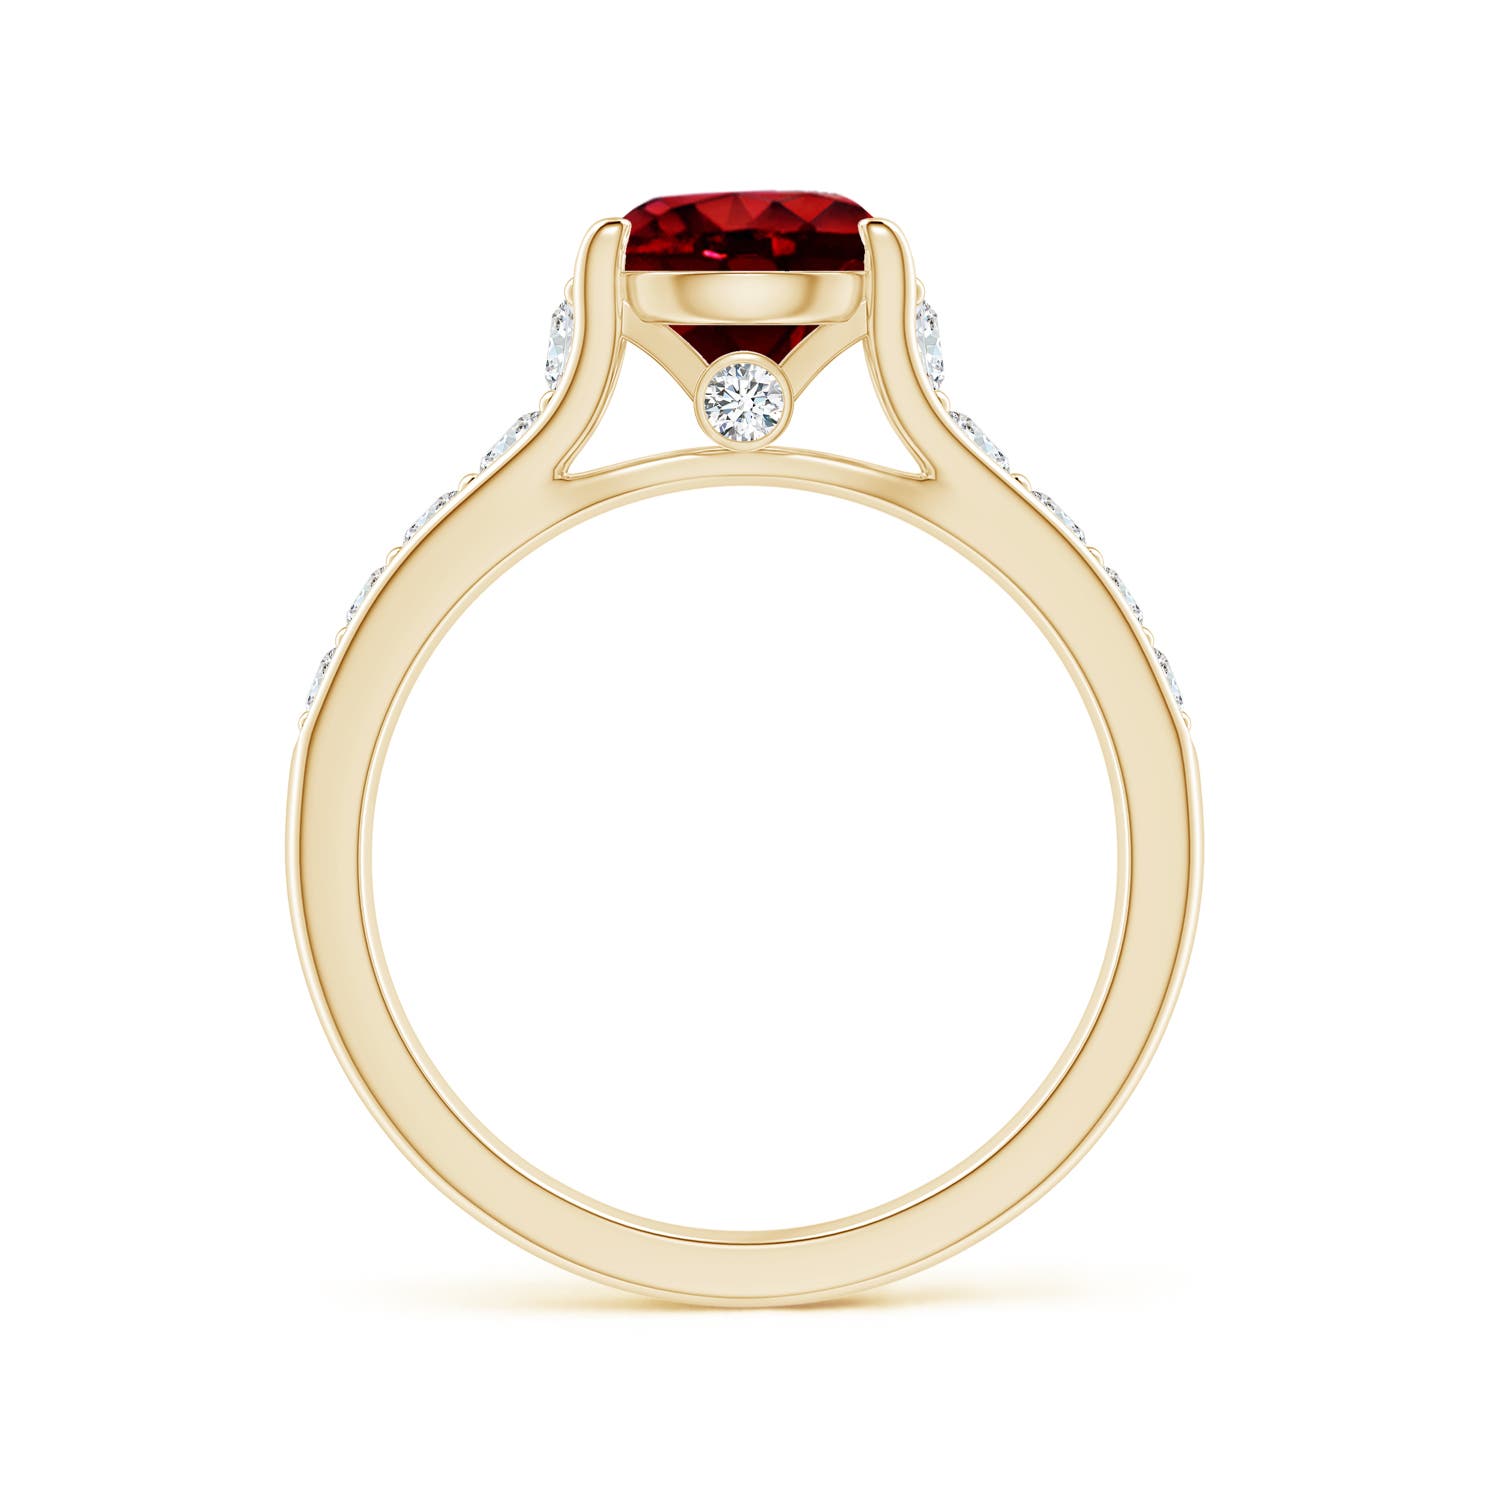 AAAA - Ruby / 1.94 CT / 14 KT Yellow Gold